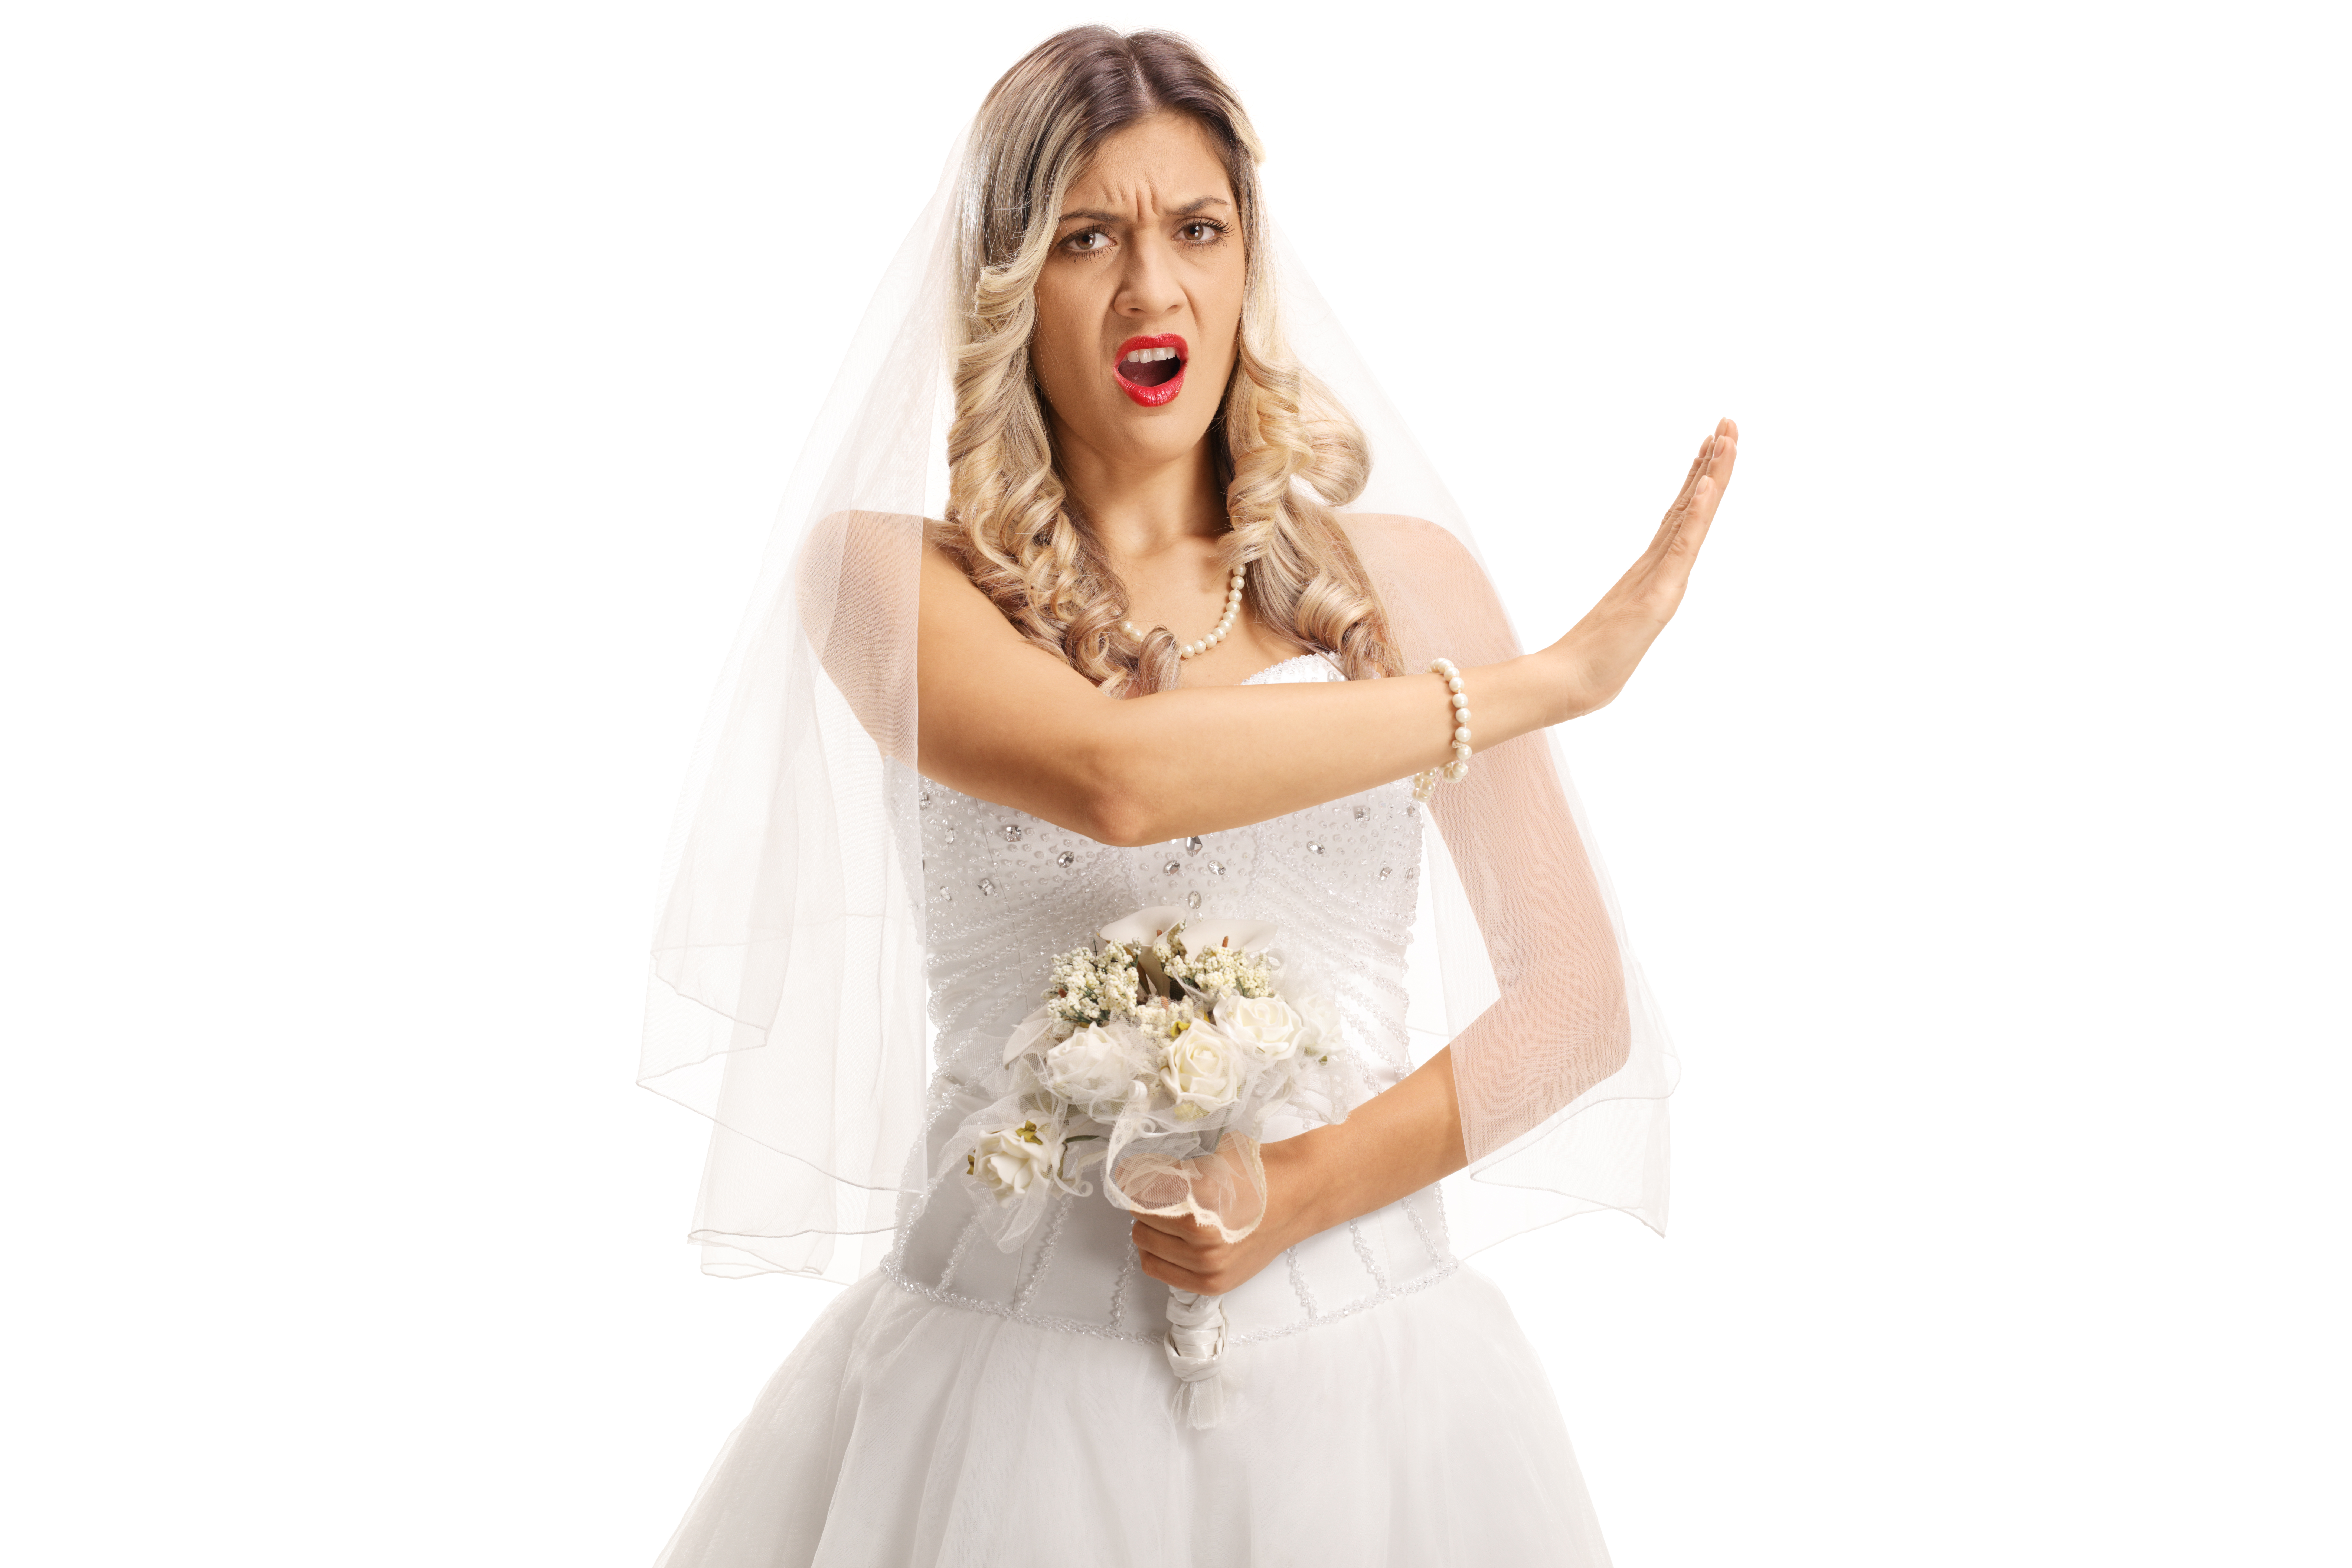 Angry bride putting her hand up to someone outside the frame | Source: Shutterstock